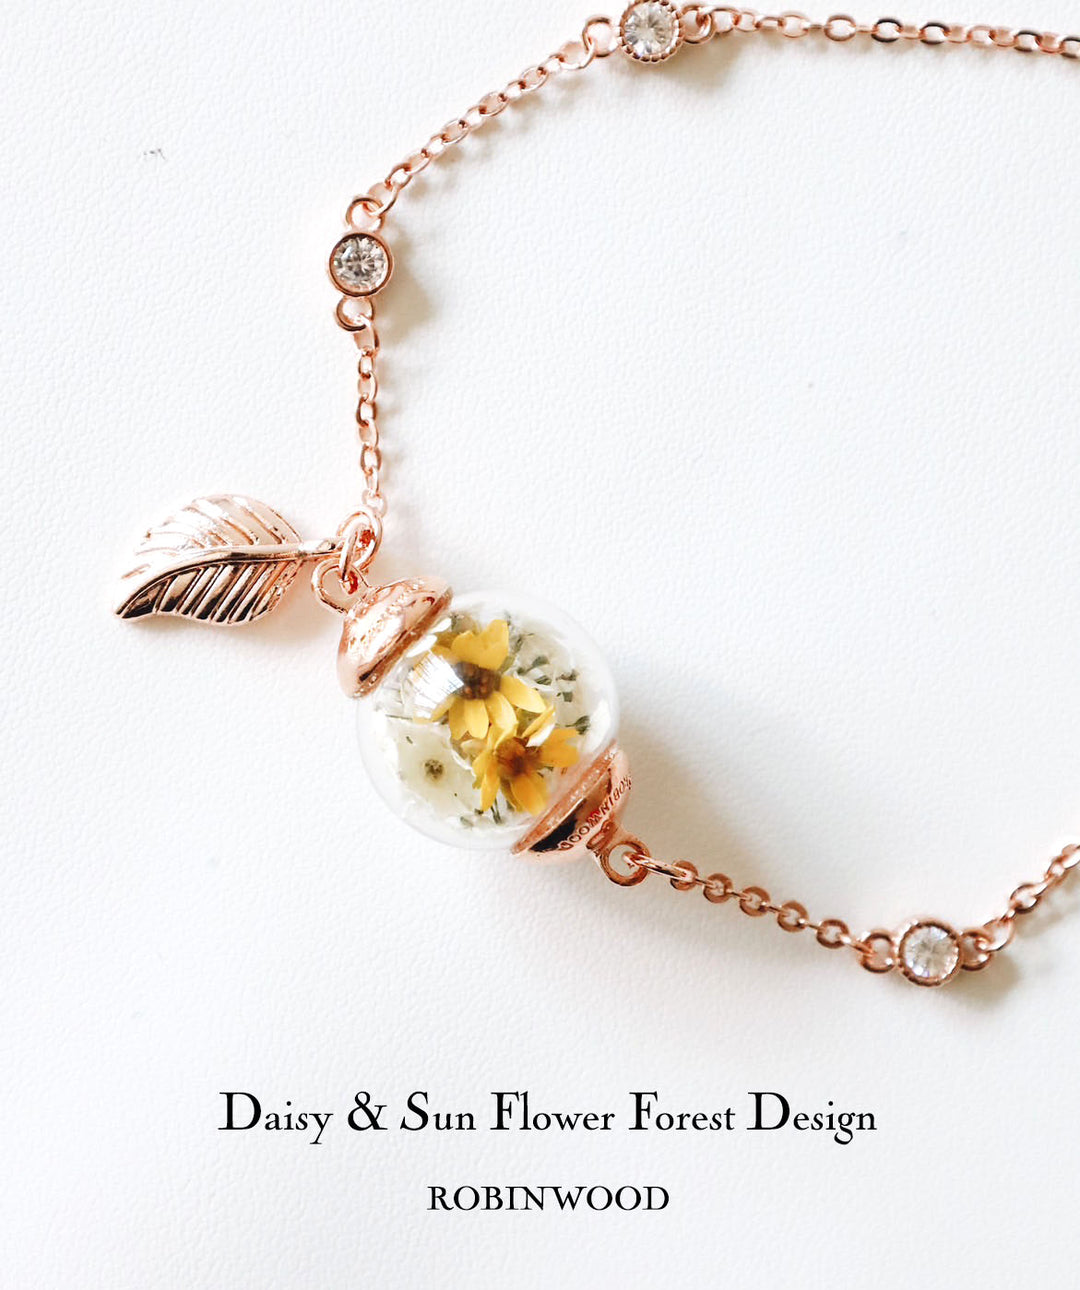 APRIL COLLECTION'S " PAVÉ SOLIDER CHAIN & LUCKY  SUN FLOWER DESIGN " ROBINWOOD